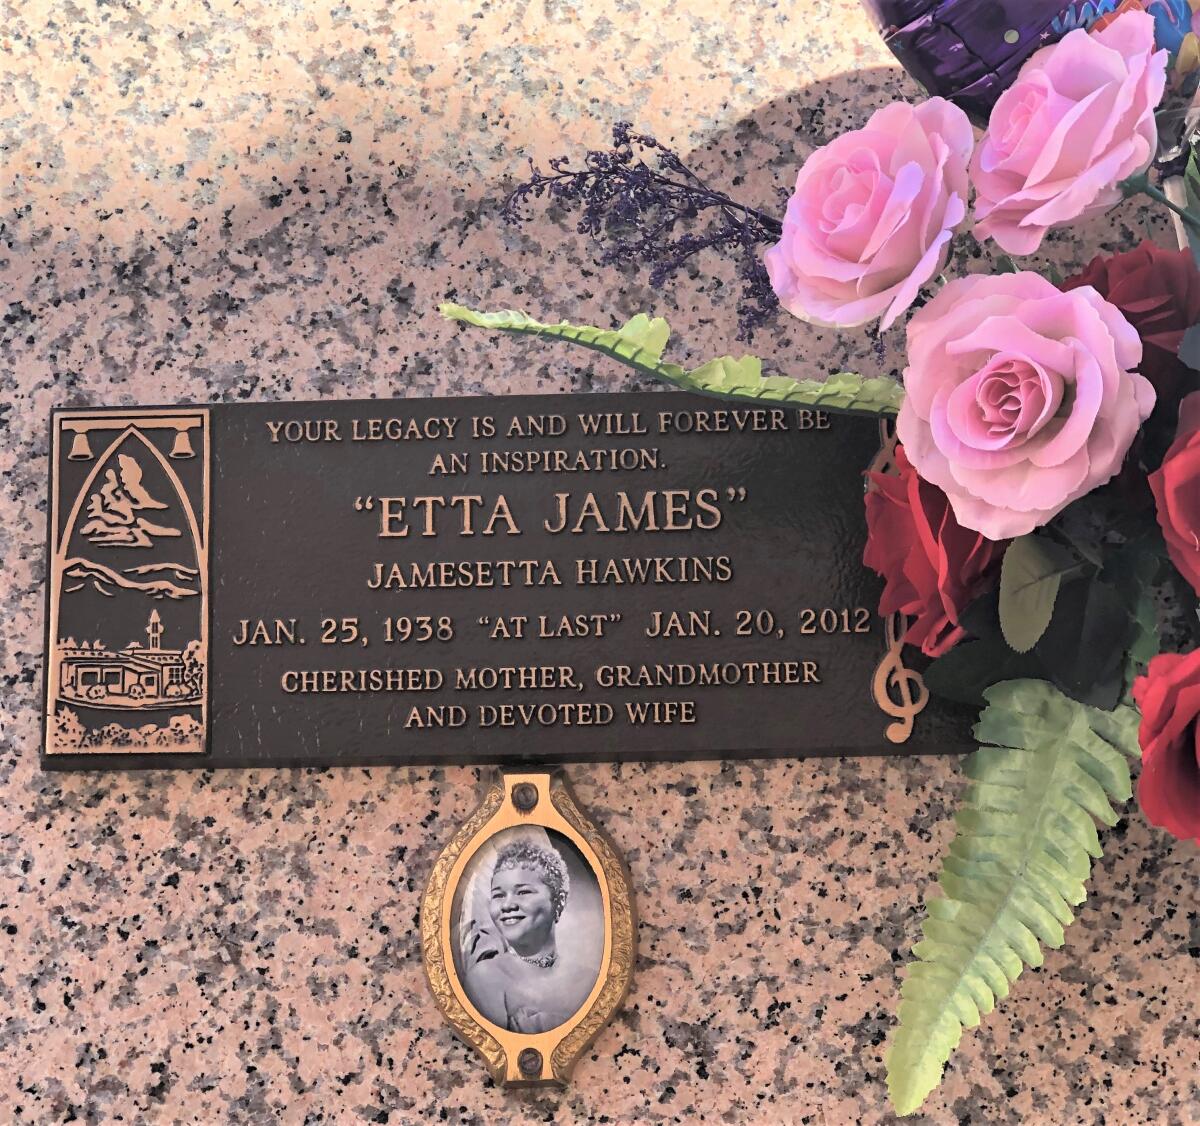 Etta James' marker at Inglewood Cemetery, final resting place to a number of famous singers and actors.